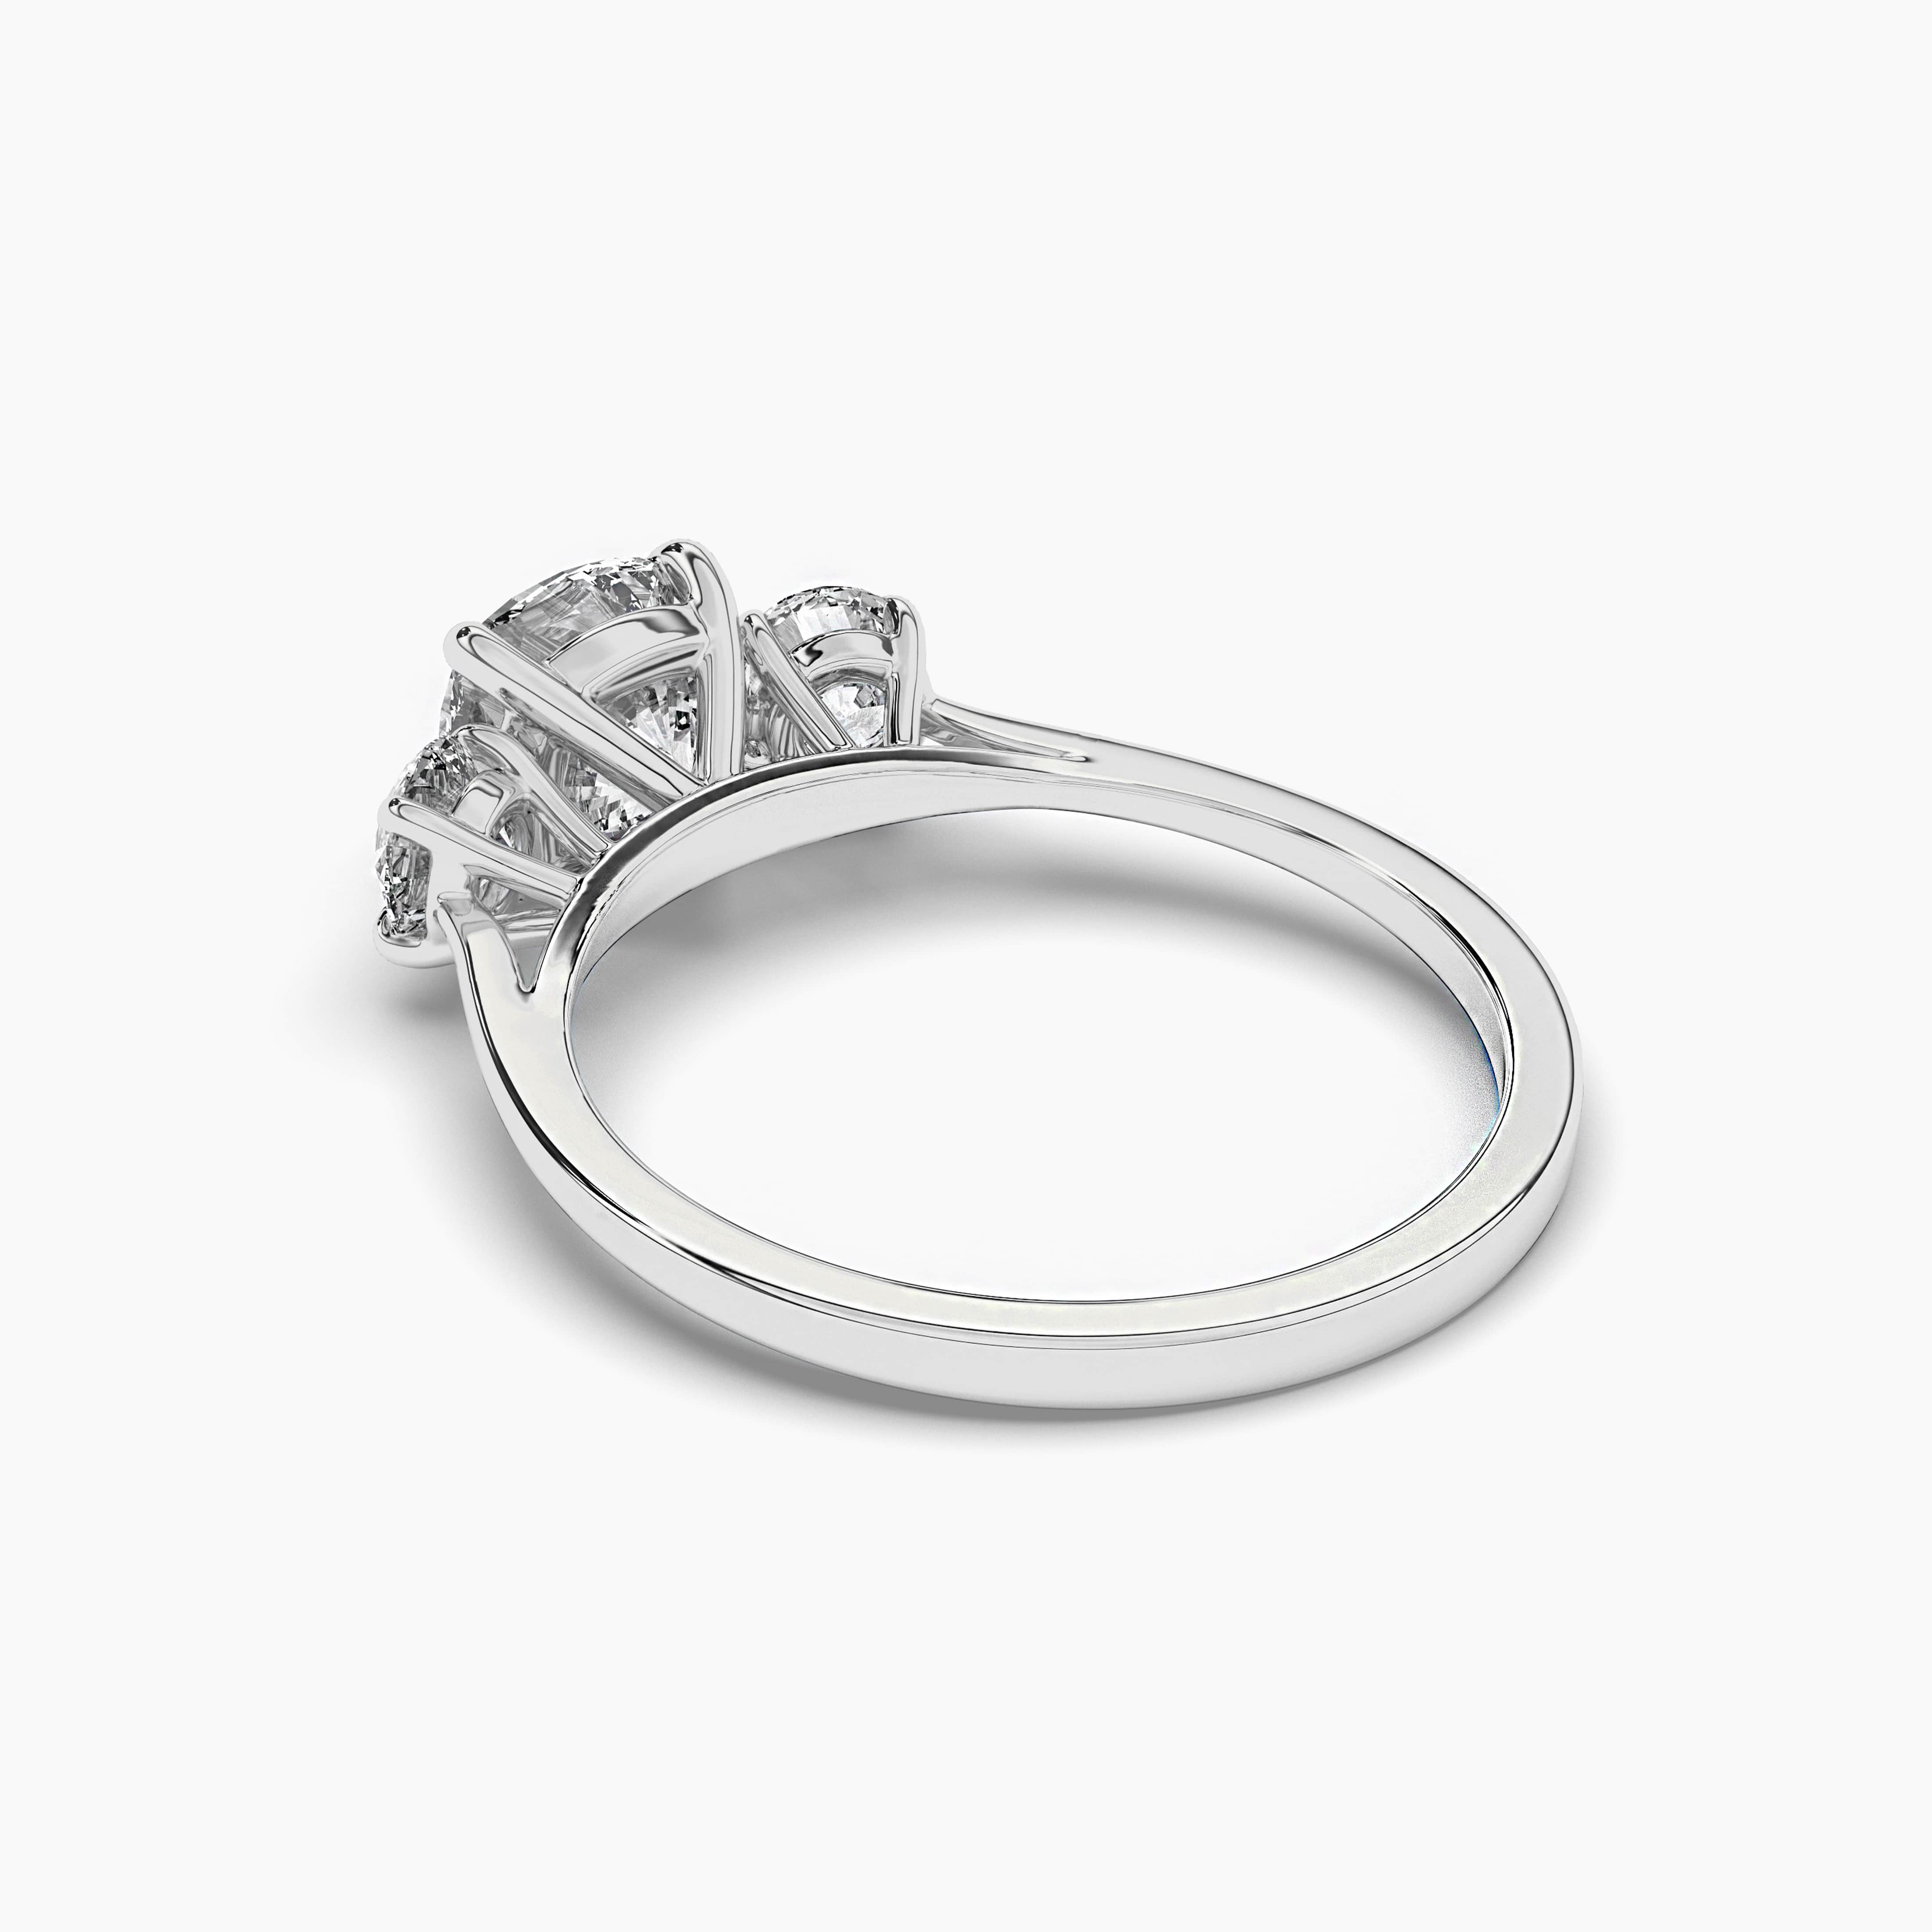  WHITE GOLD DIAMOND ENGAGEMENT RING FOR WOMAN